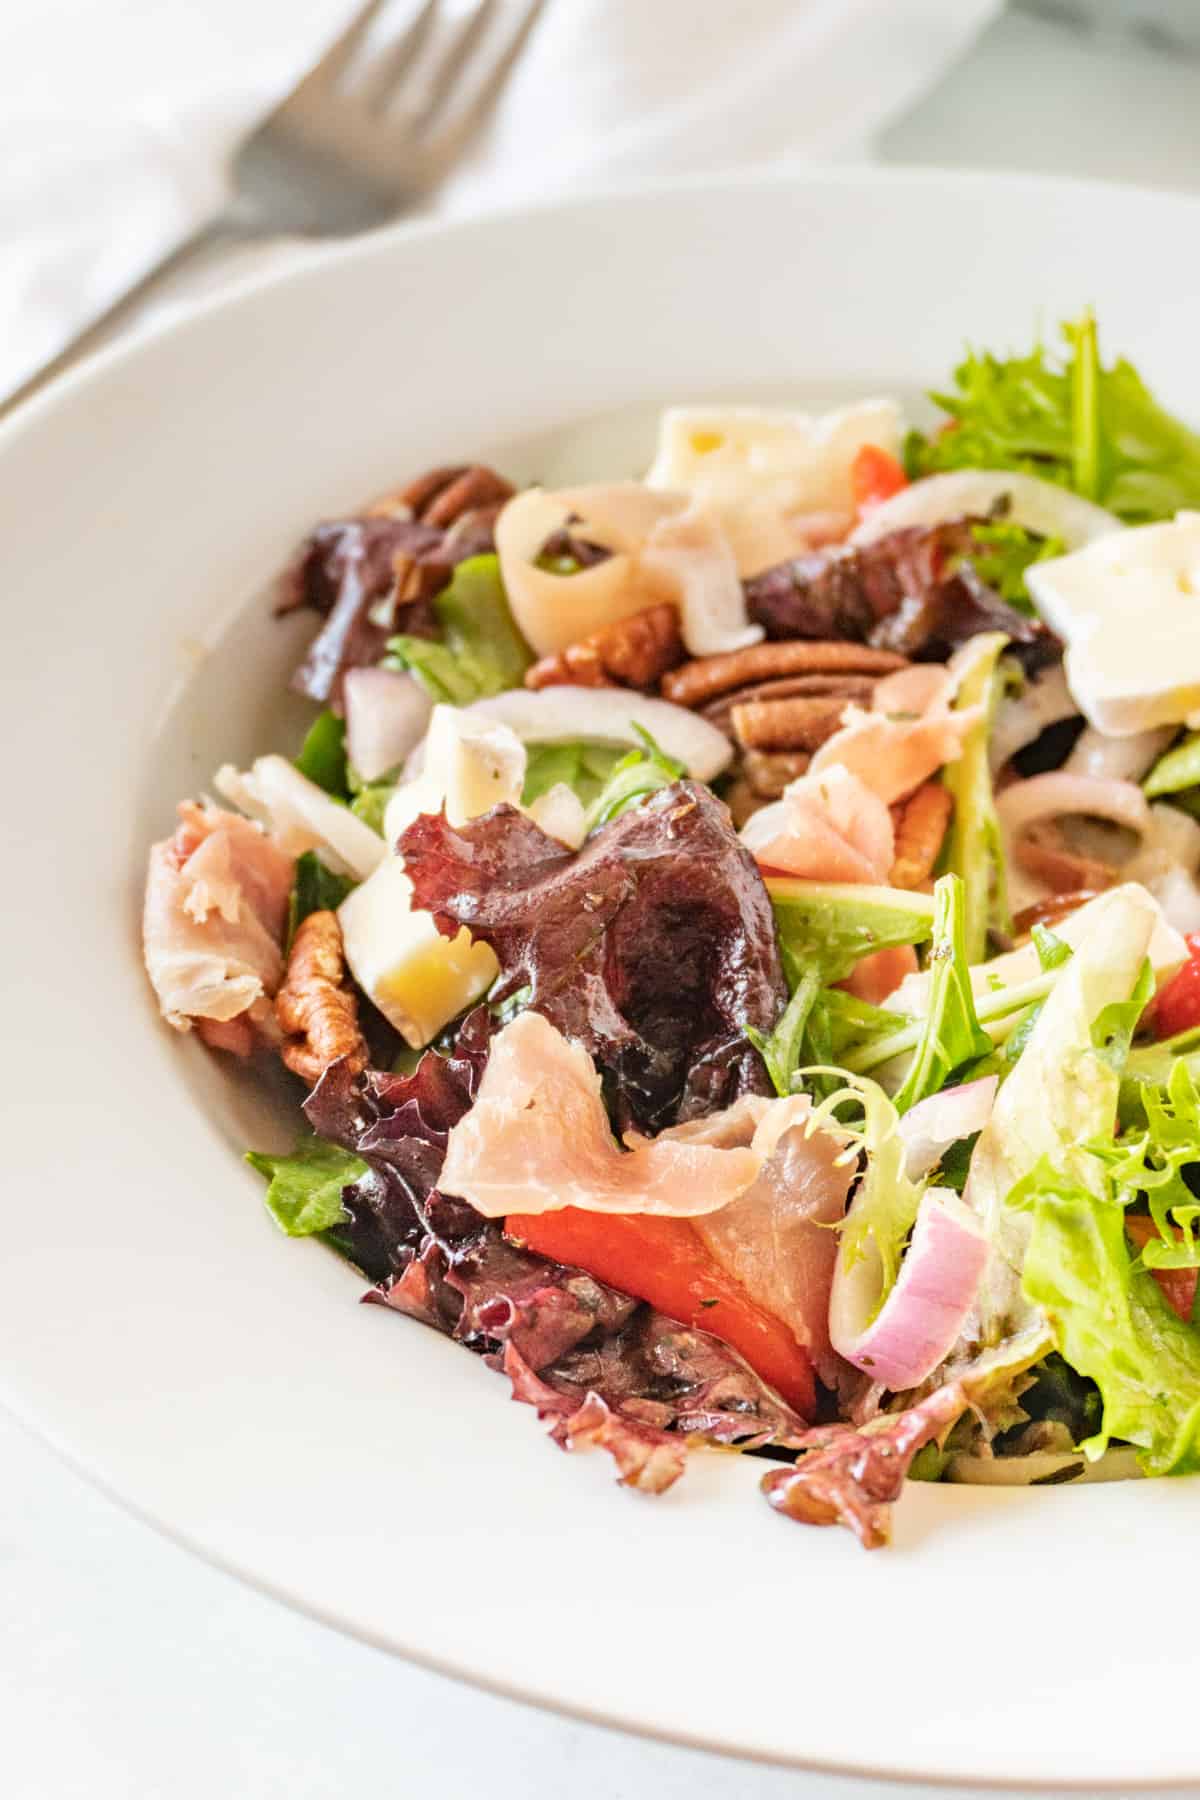 white salad bowl filled with salad mix, prosciutto, brie, red onion